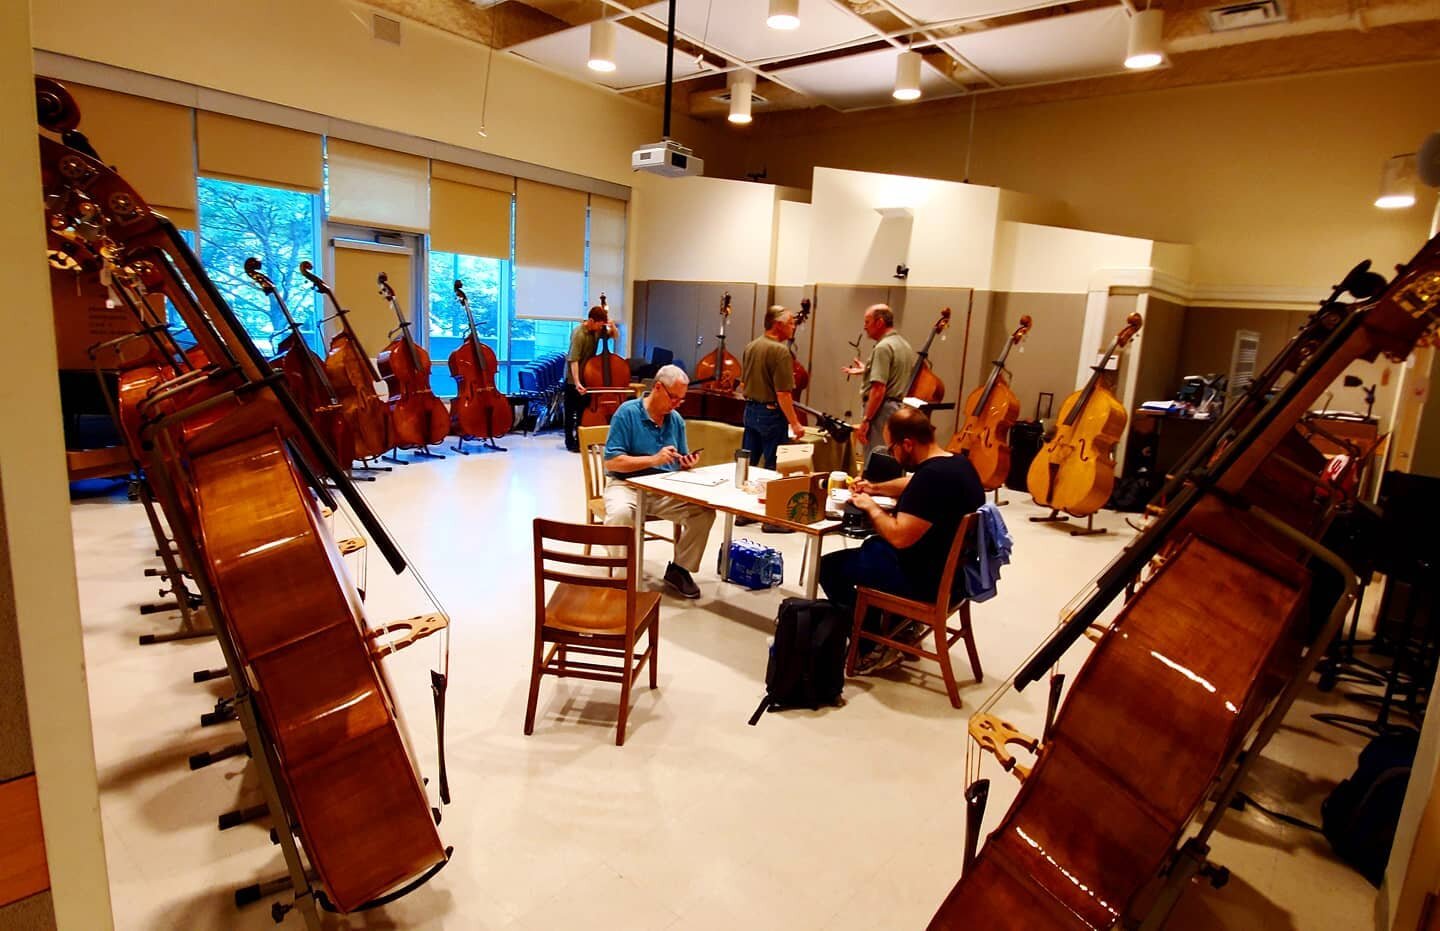 Two years ago: I was so thrilled and honoured to be part of a team of six judges to decide the winners of the 2019 ISB Bass Maker's competition. Upon arriving in Bloomington Indiana, we were basically locked in the room for three days and left to pla